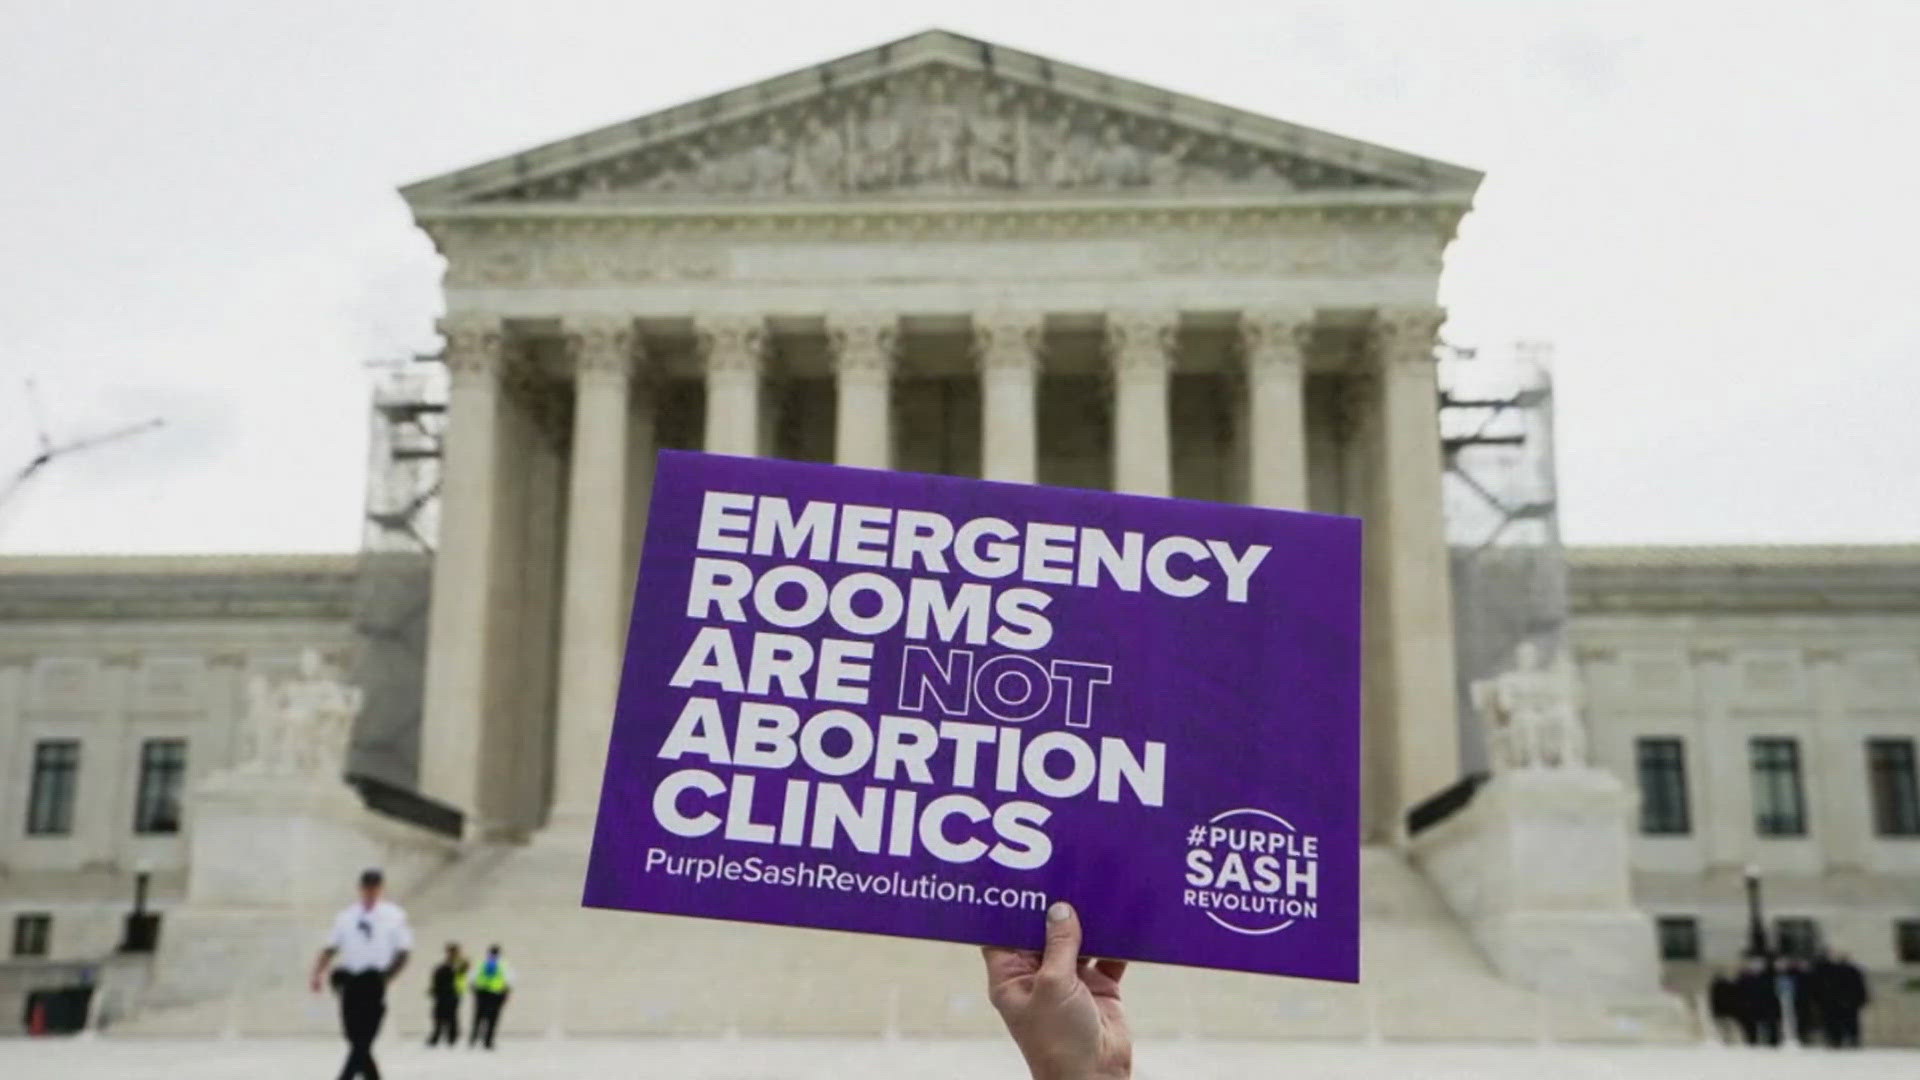 Abortion rights are back before the supreme court two years after it overturned Roe v. Wade.